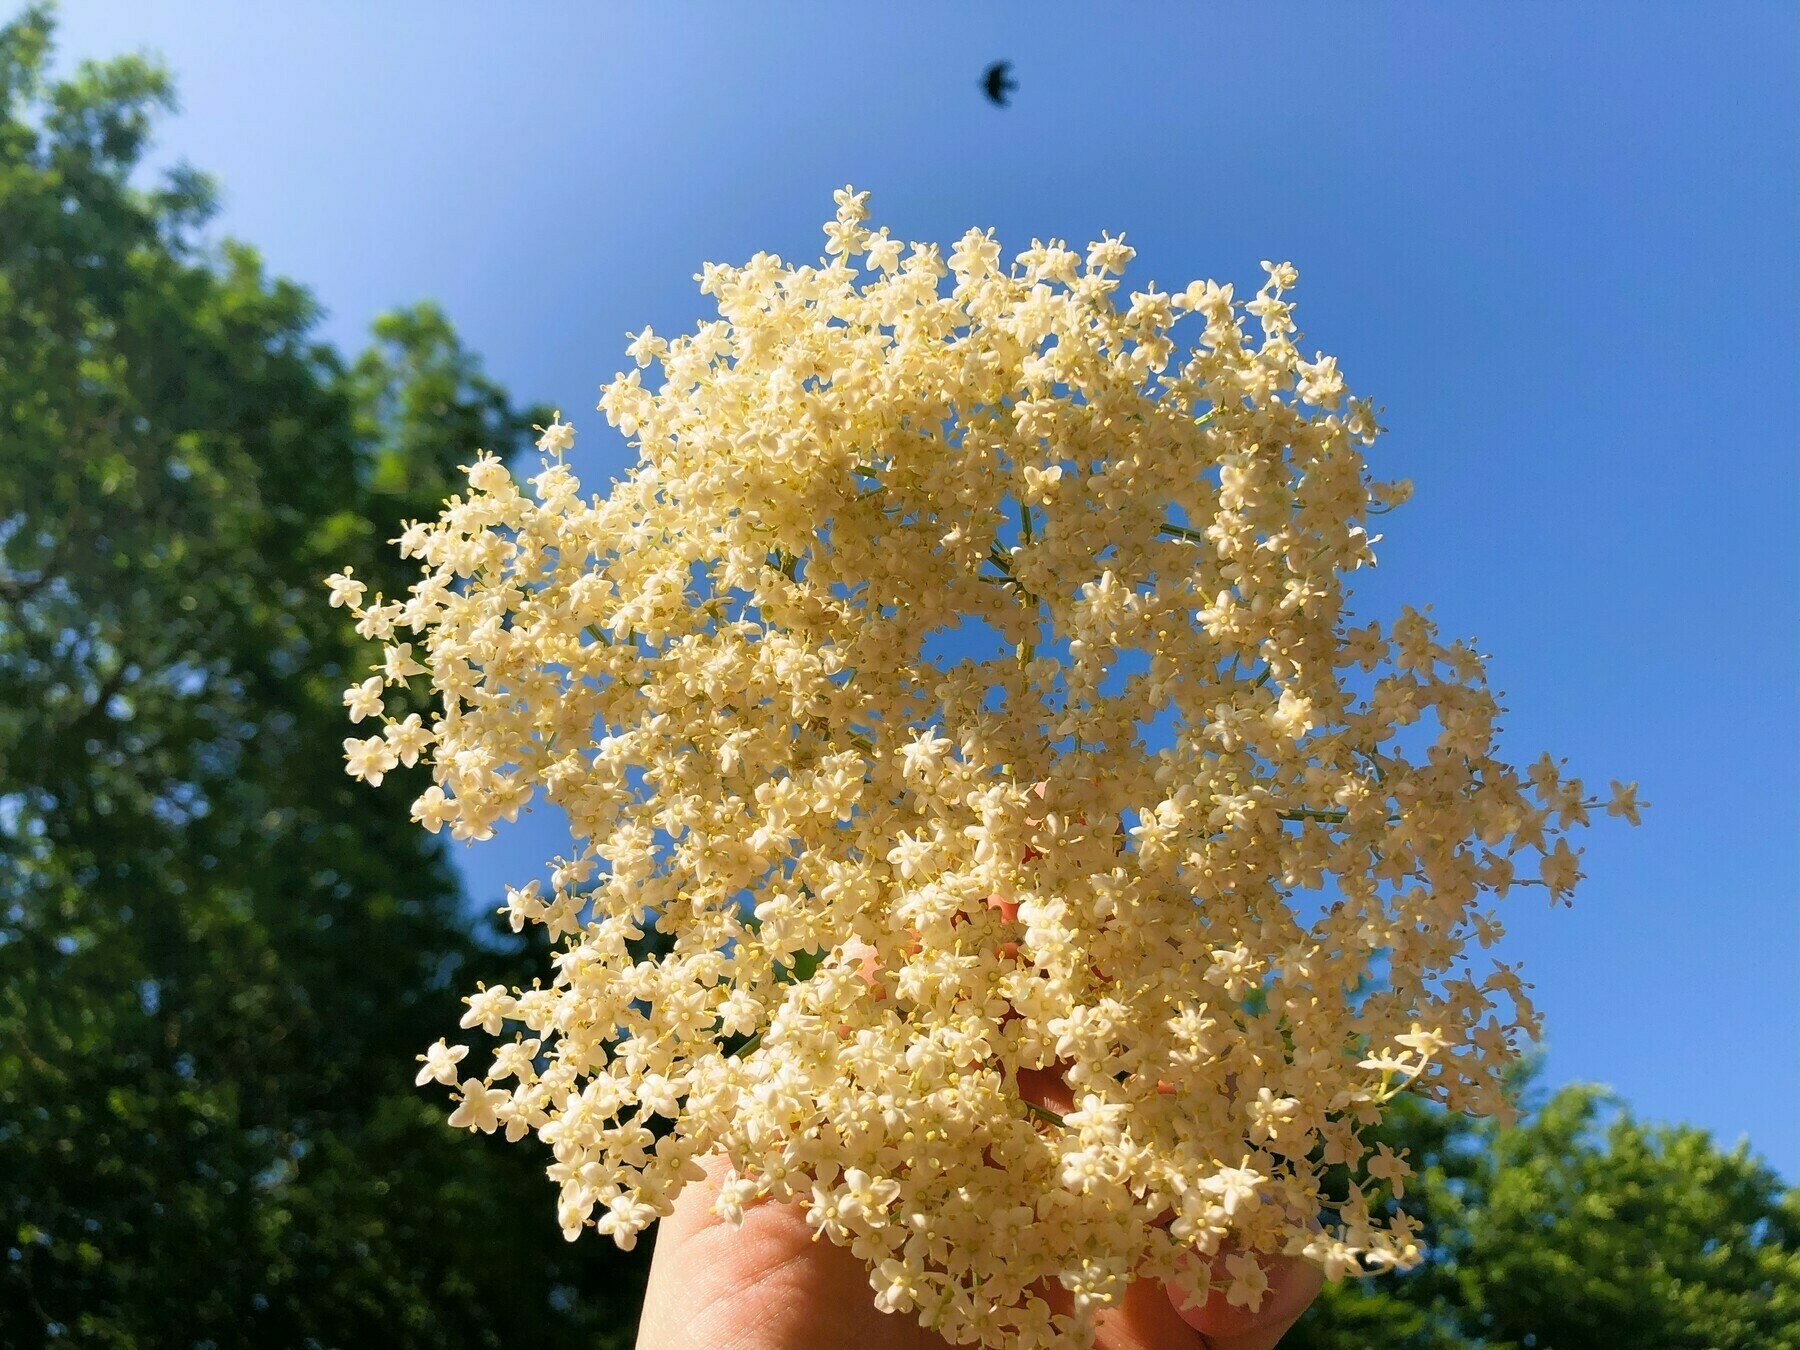 elderflower held against the backdrop of a blue sky with a distant crow flying past